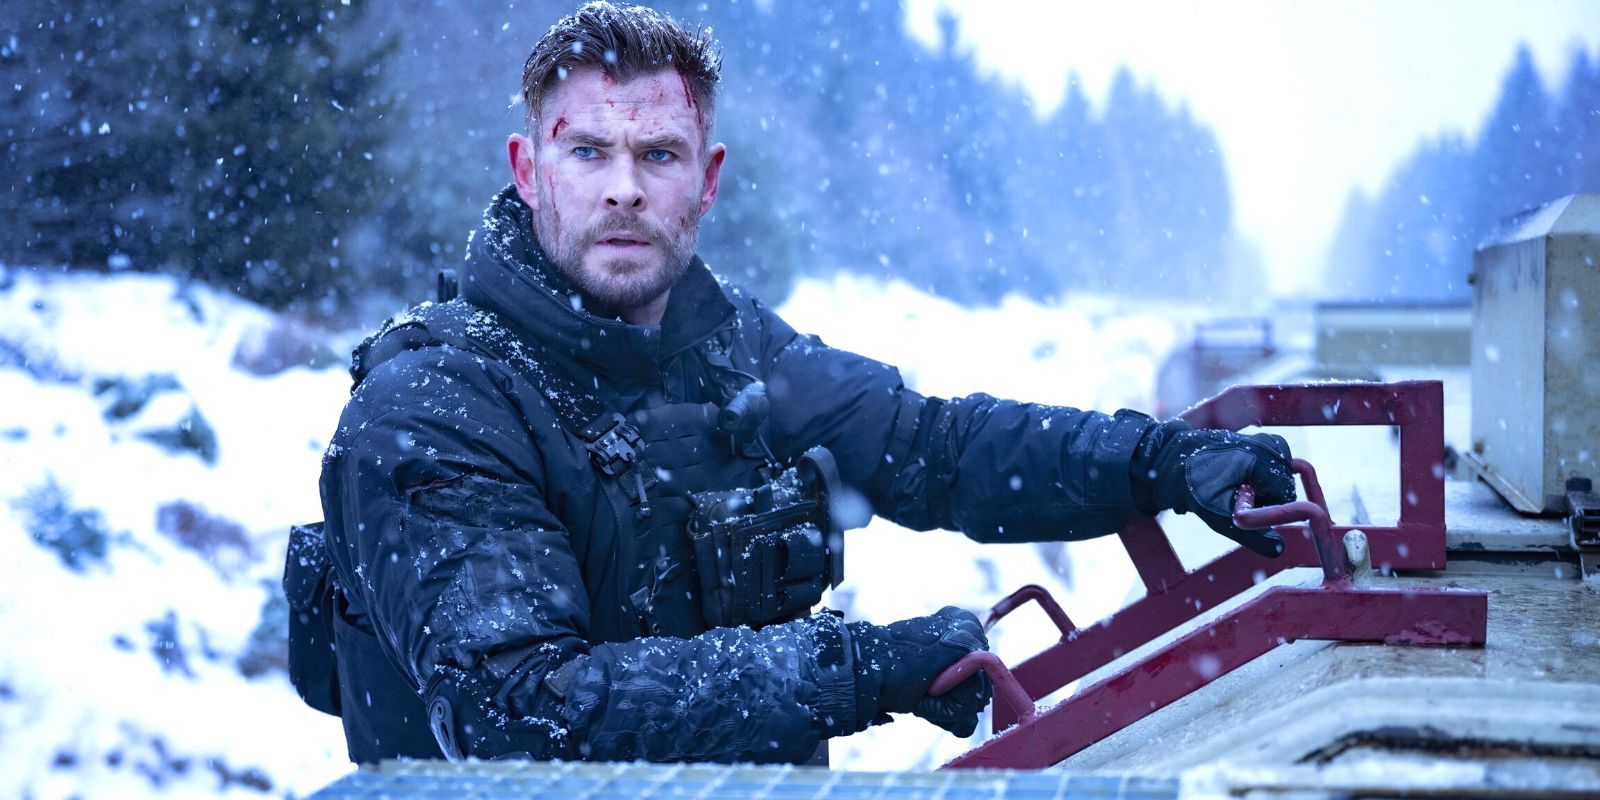 Chris Hemsworth looking stoic as he clutches to the side of a snow-covered train